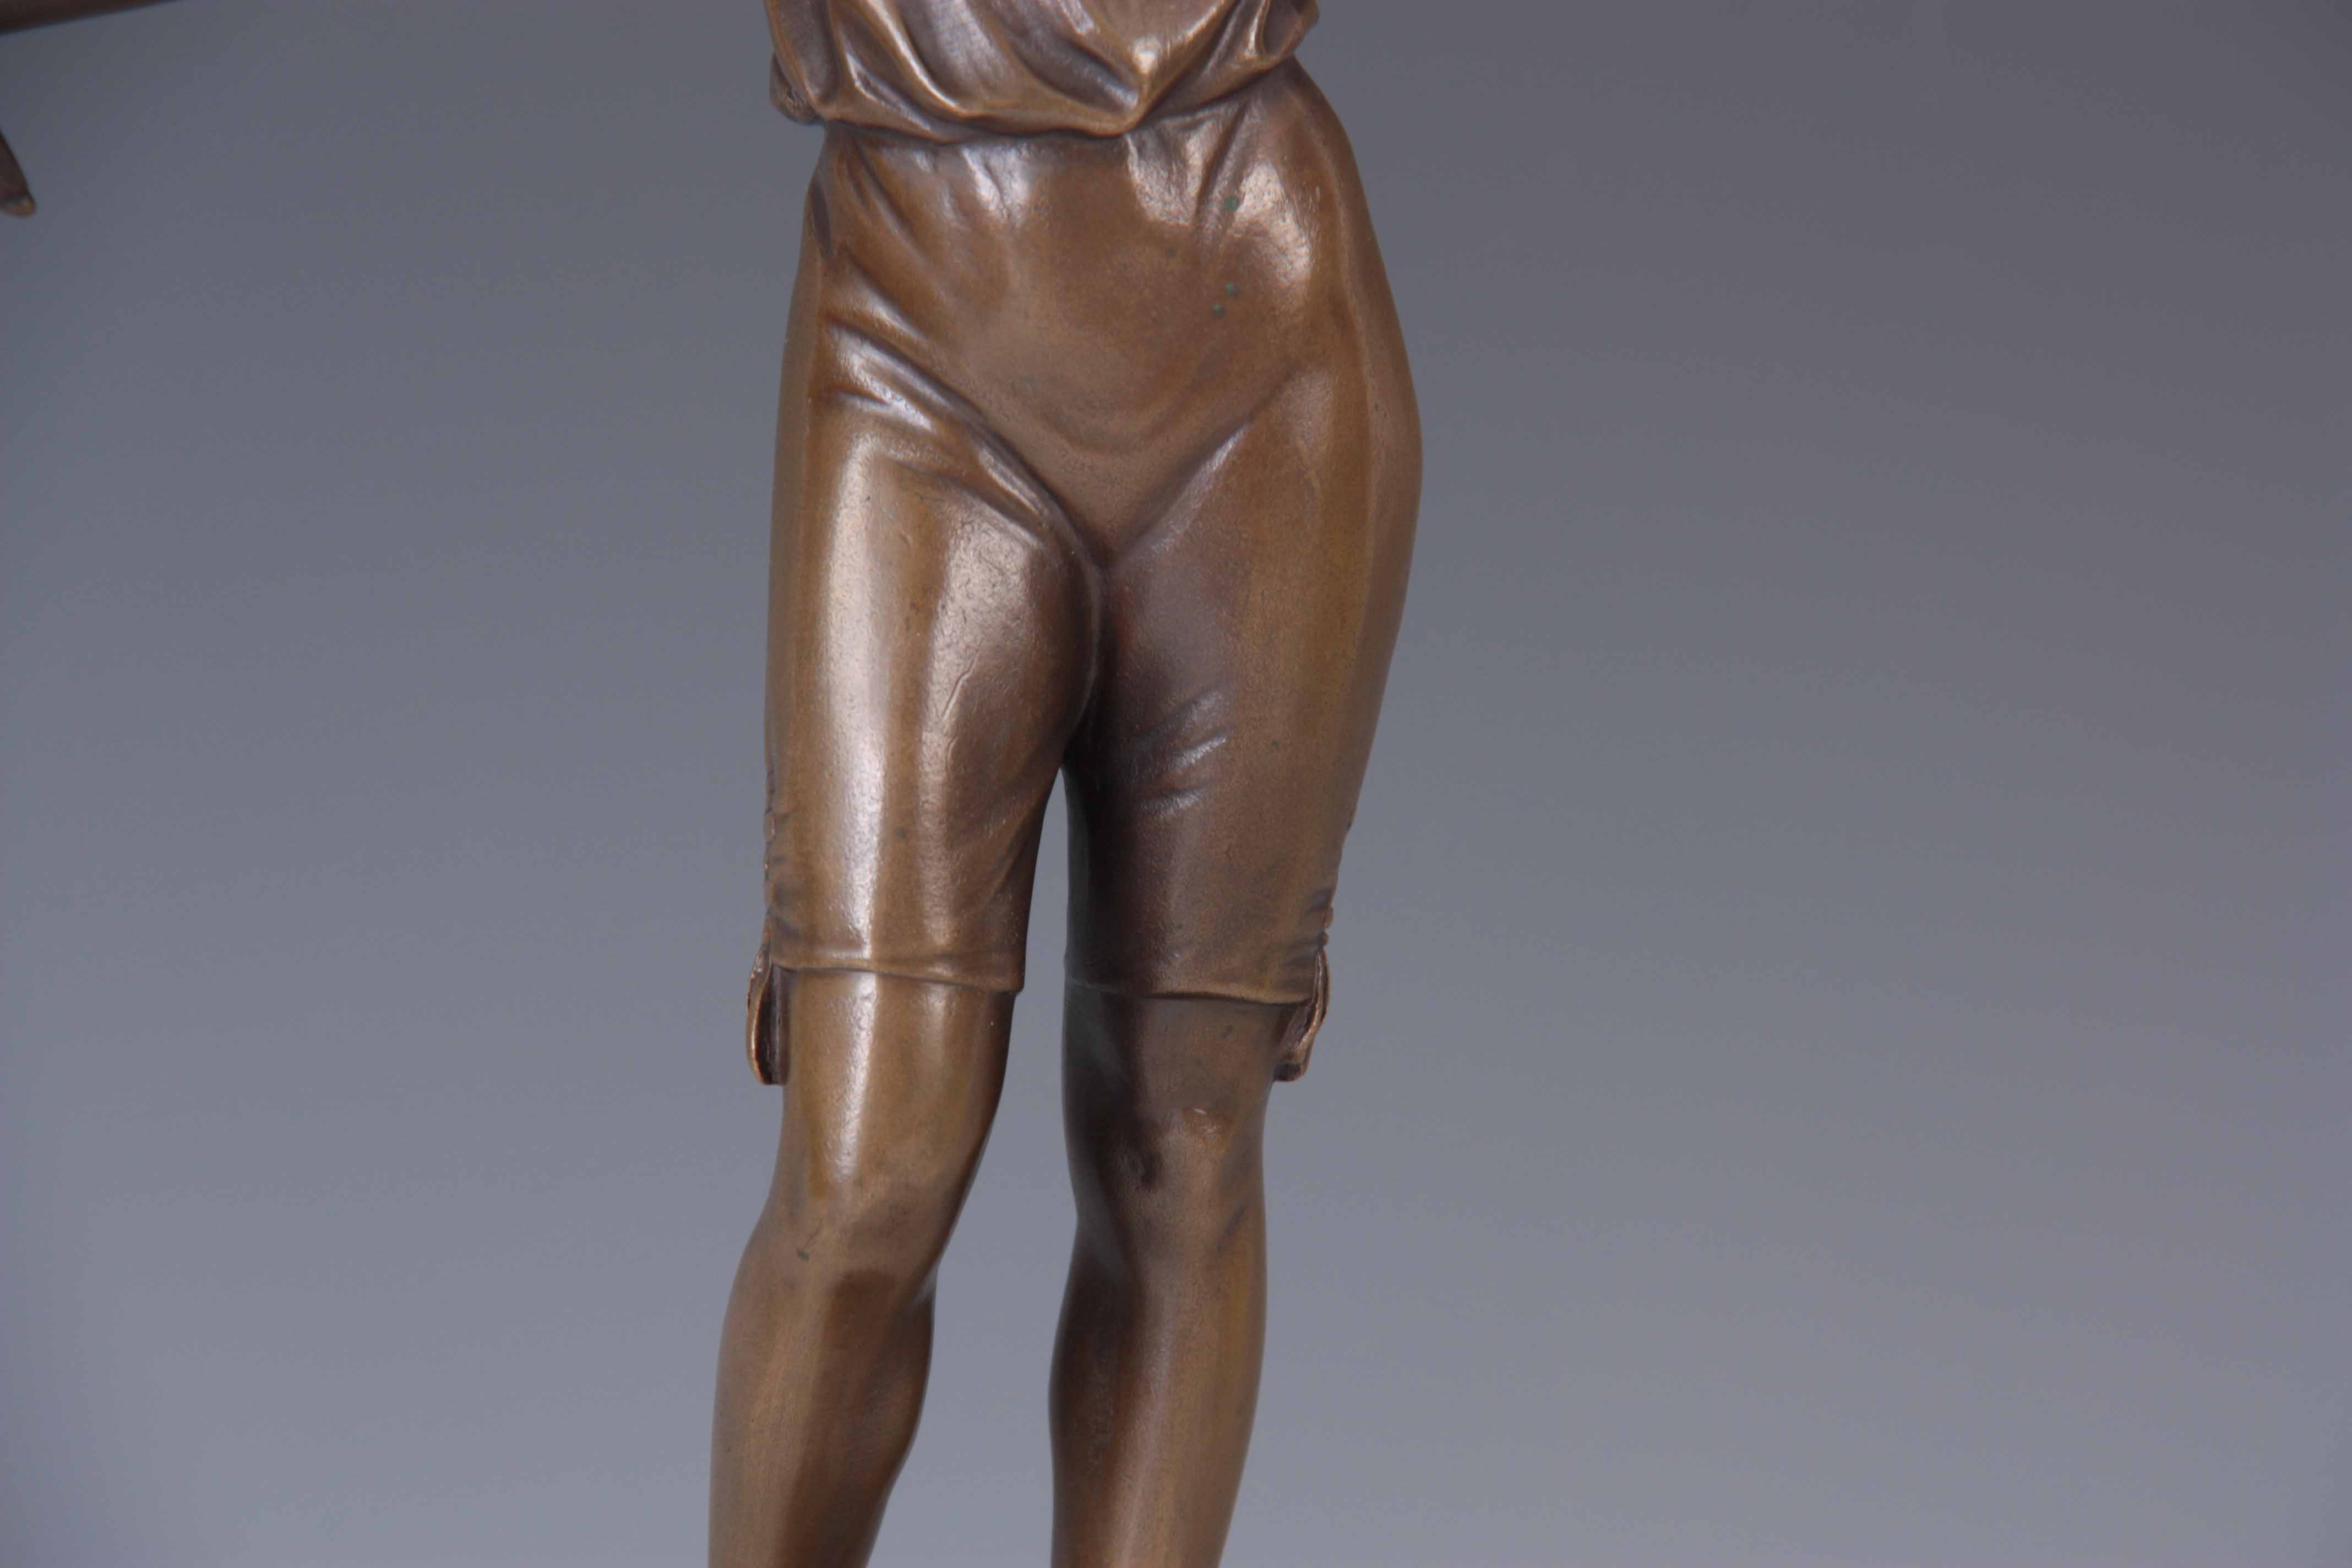 BRUNO ZACH. AN EARLY 20TH CENTURY AUSTRIAN BRONZE SCULPTURE modelled as a young woman looking into a - Image 4 of 9